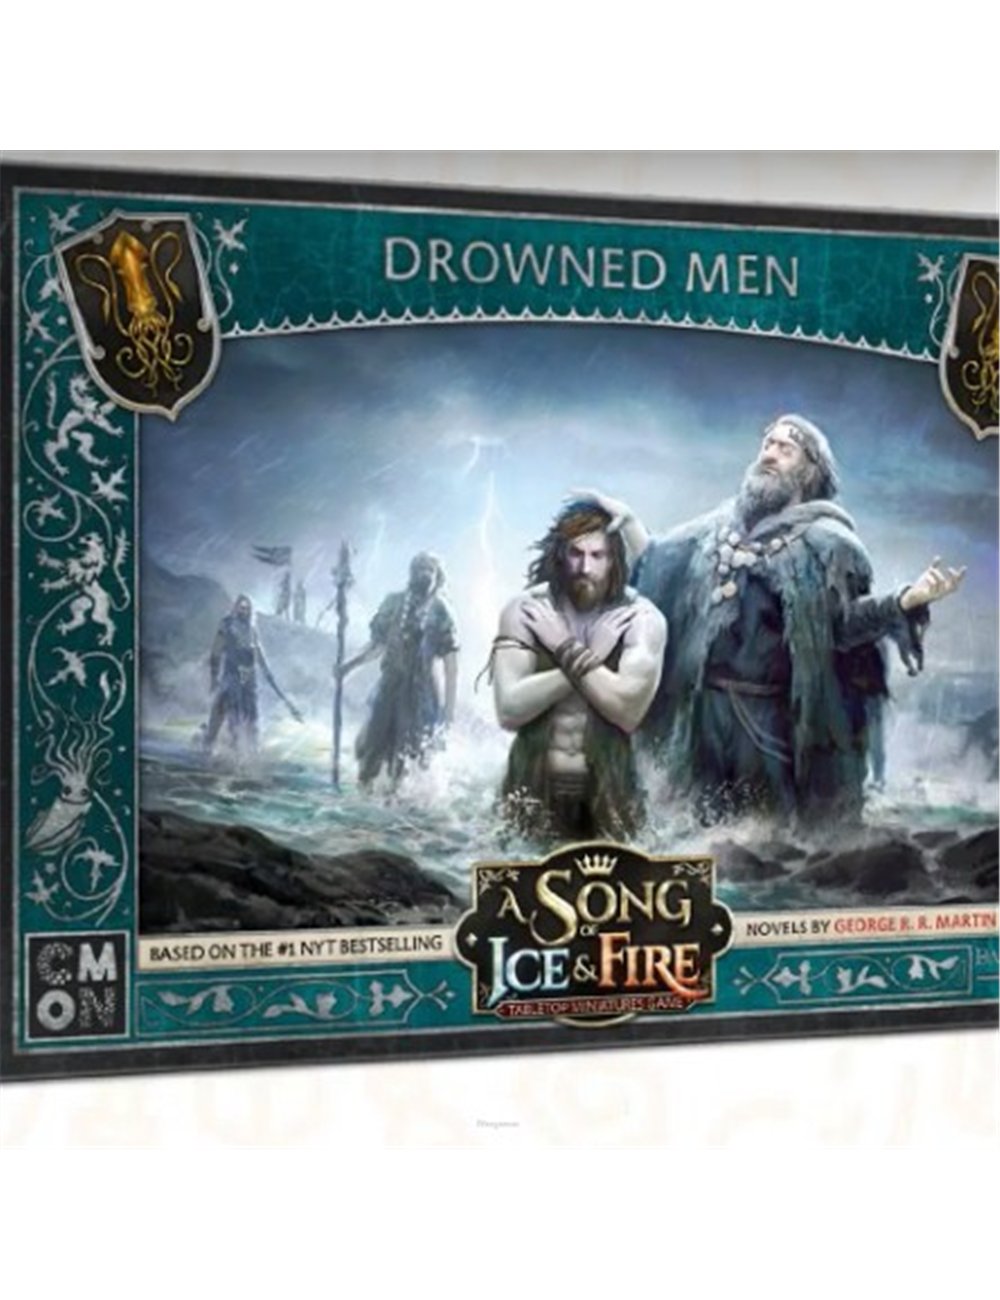 A SONG OF ICE & FIRE -  Drowned Men